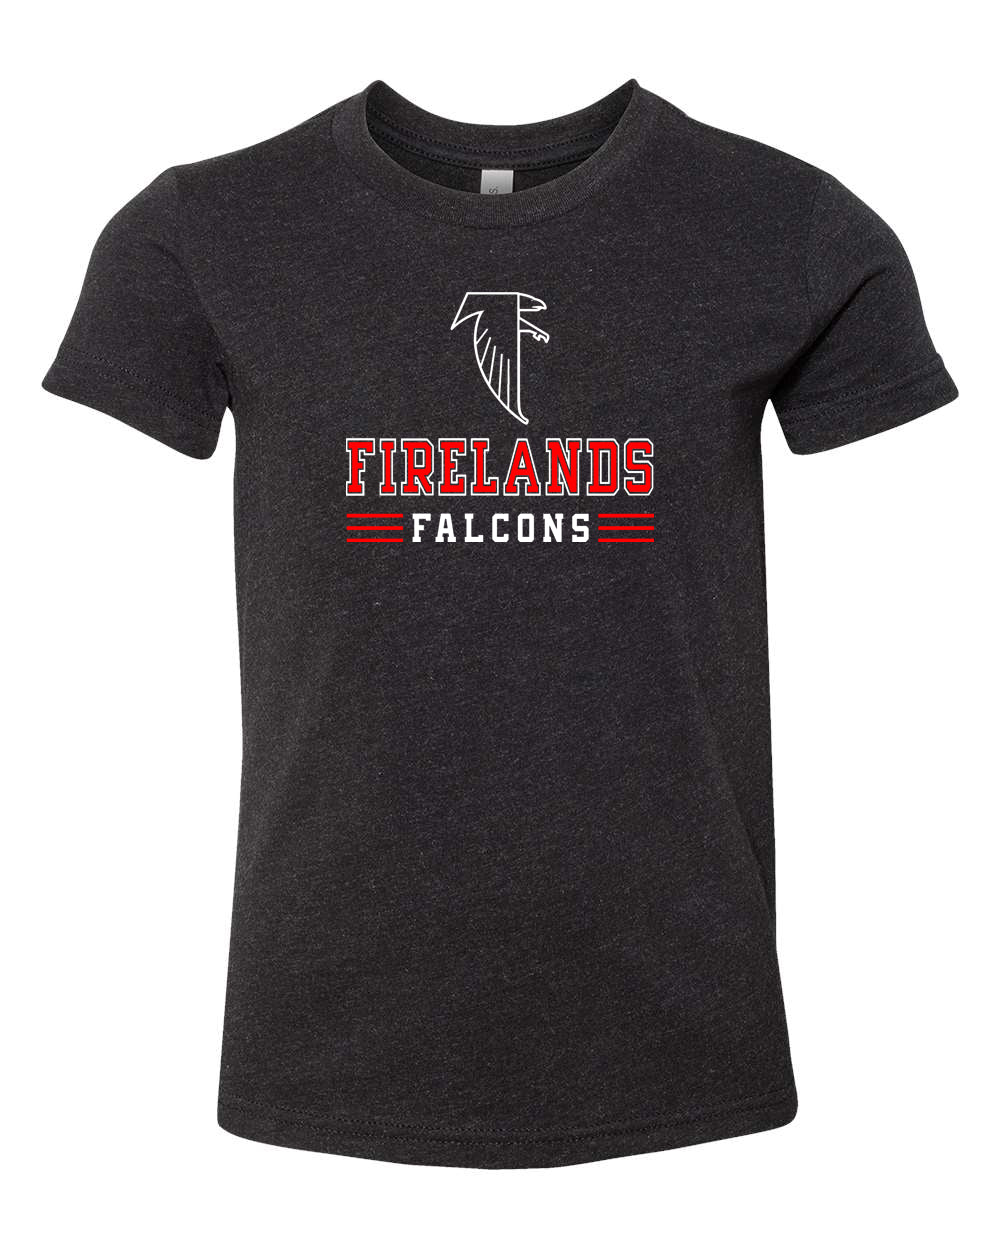 Youth - Firelands Falcons - Tee - Mistakes on the Lake